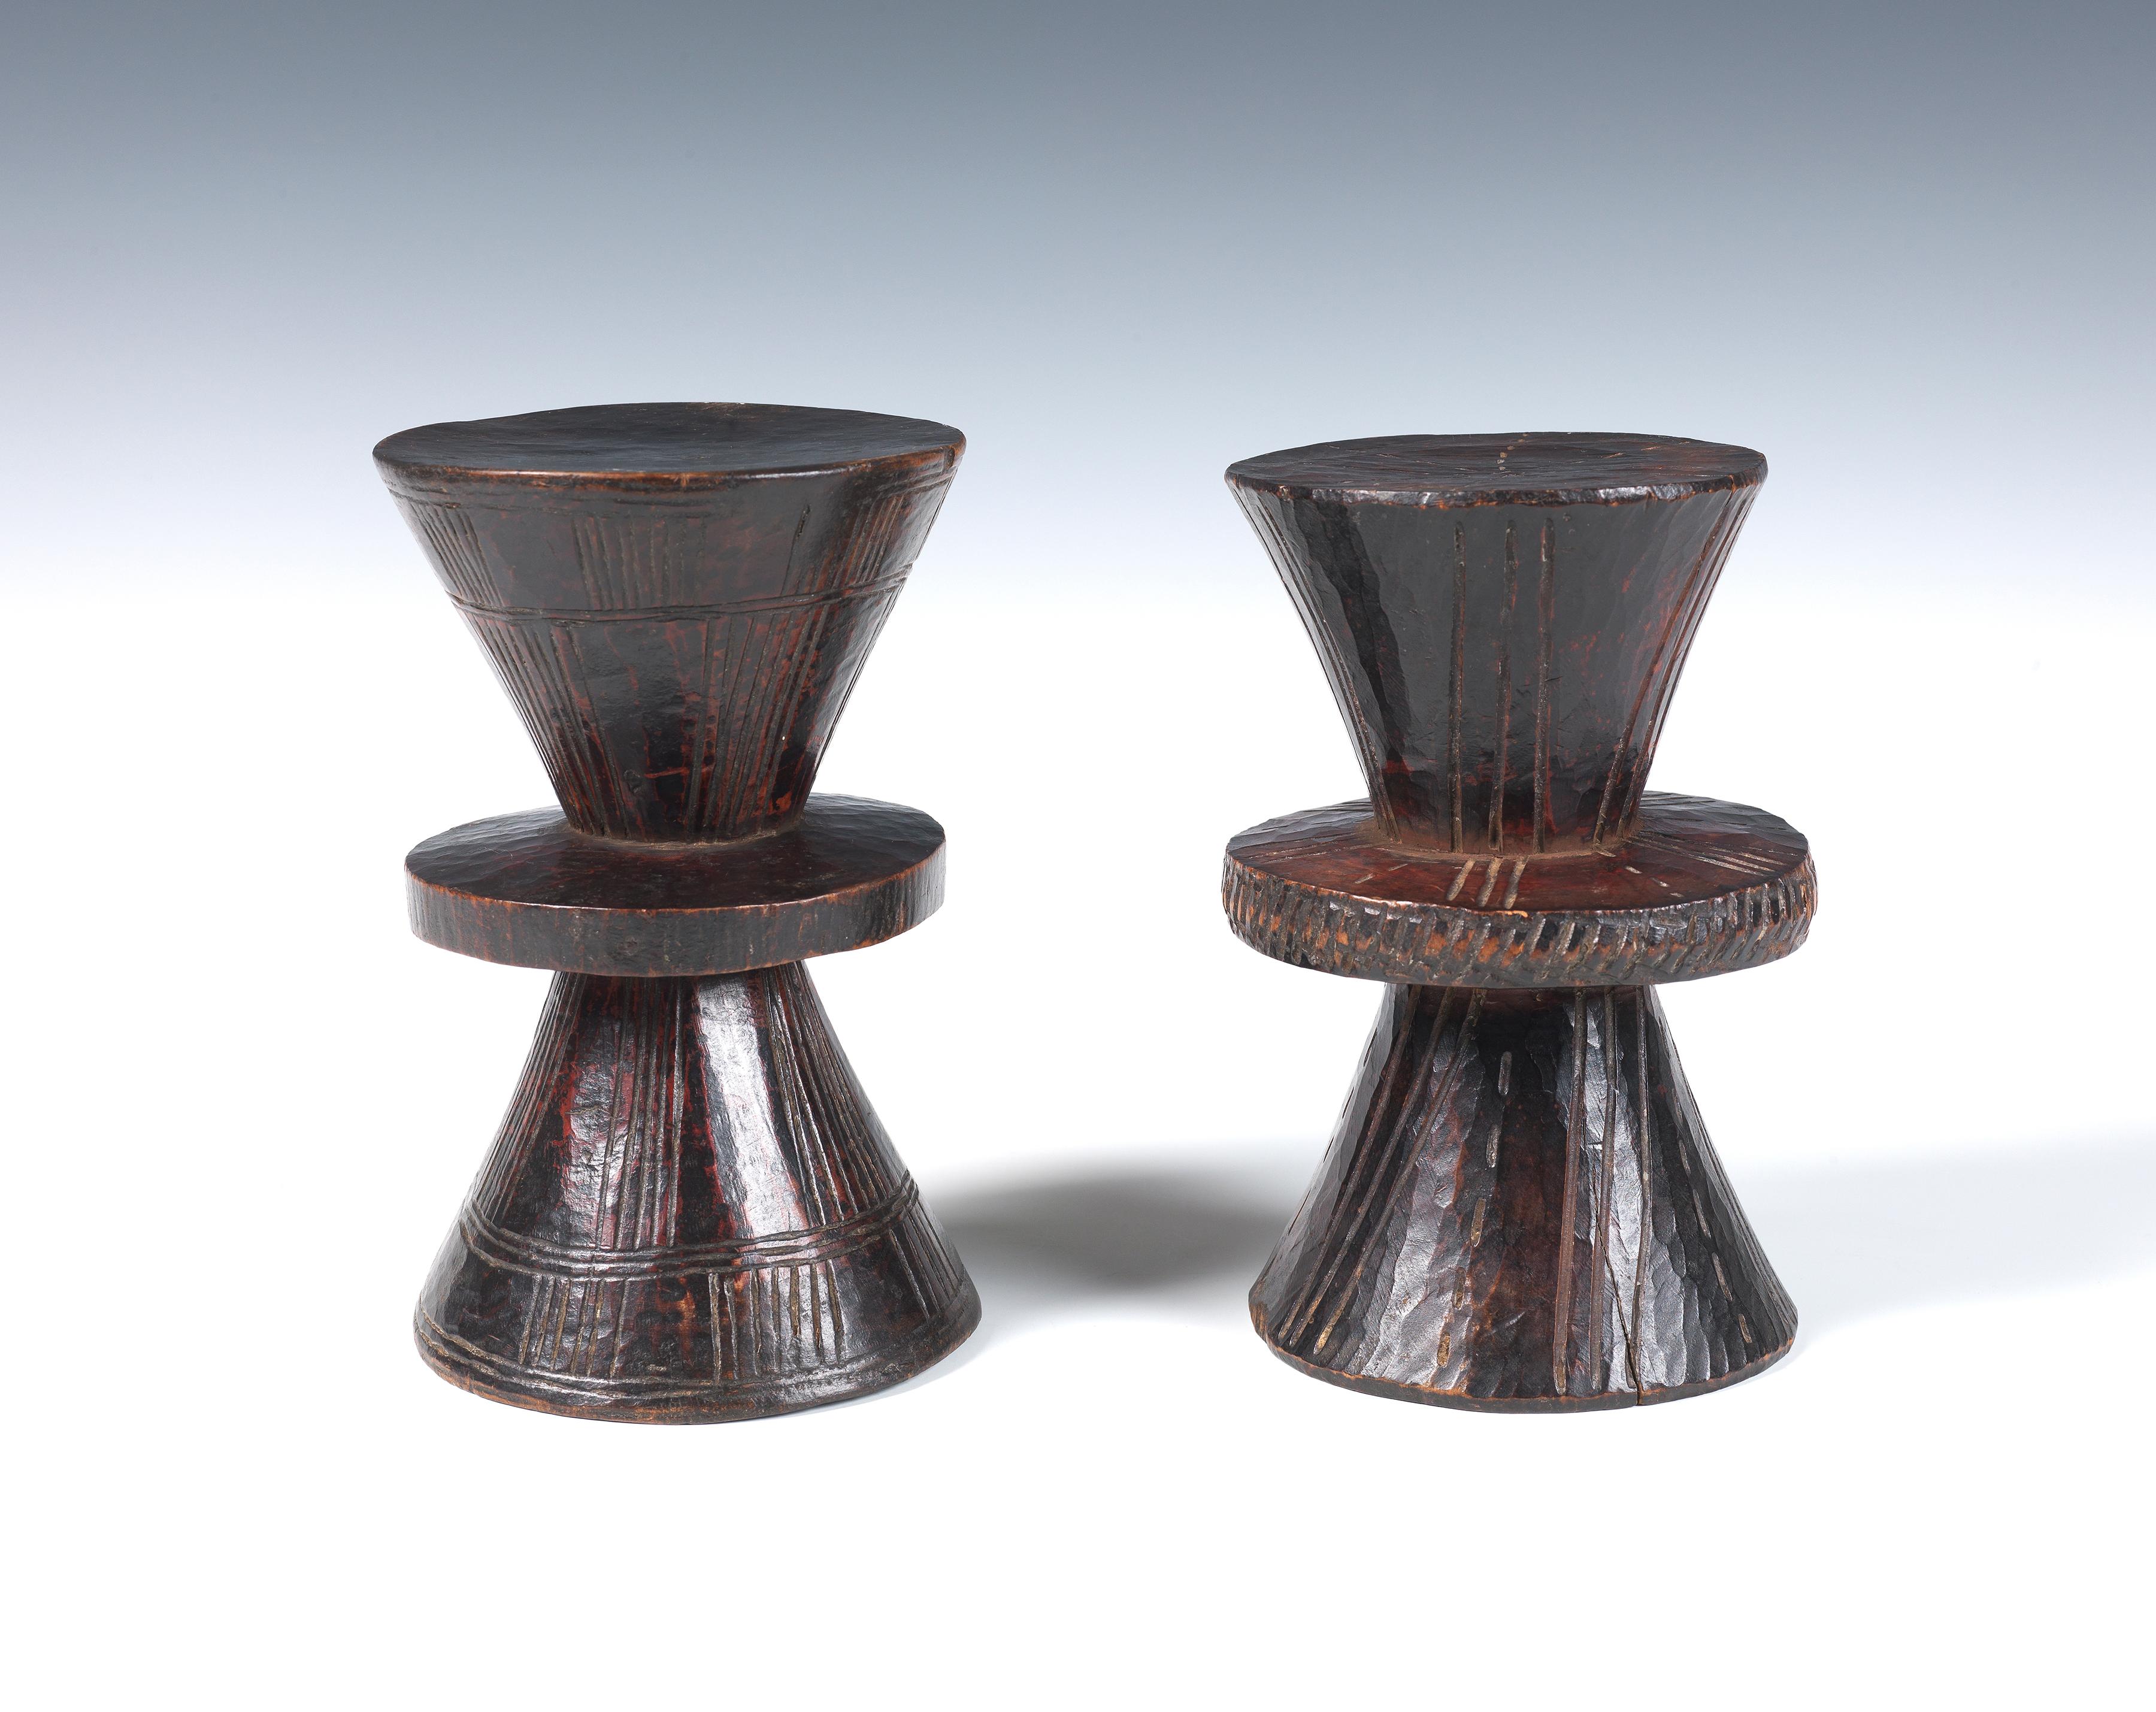 Antique Tribal Ethiopian Ceremonial Coffee Stands In Good Condition For Sale In Point Richmond, CA